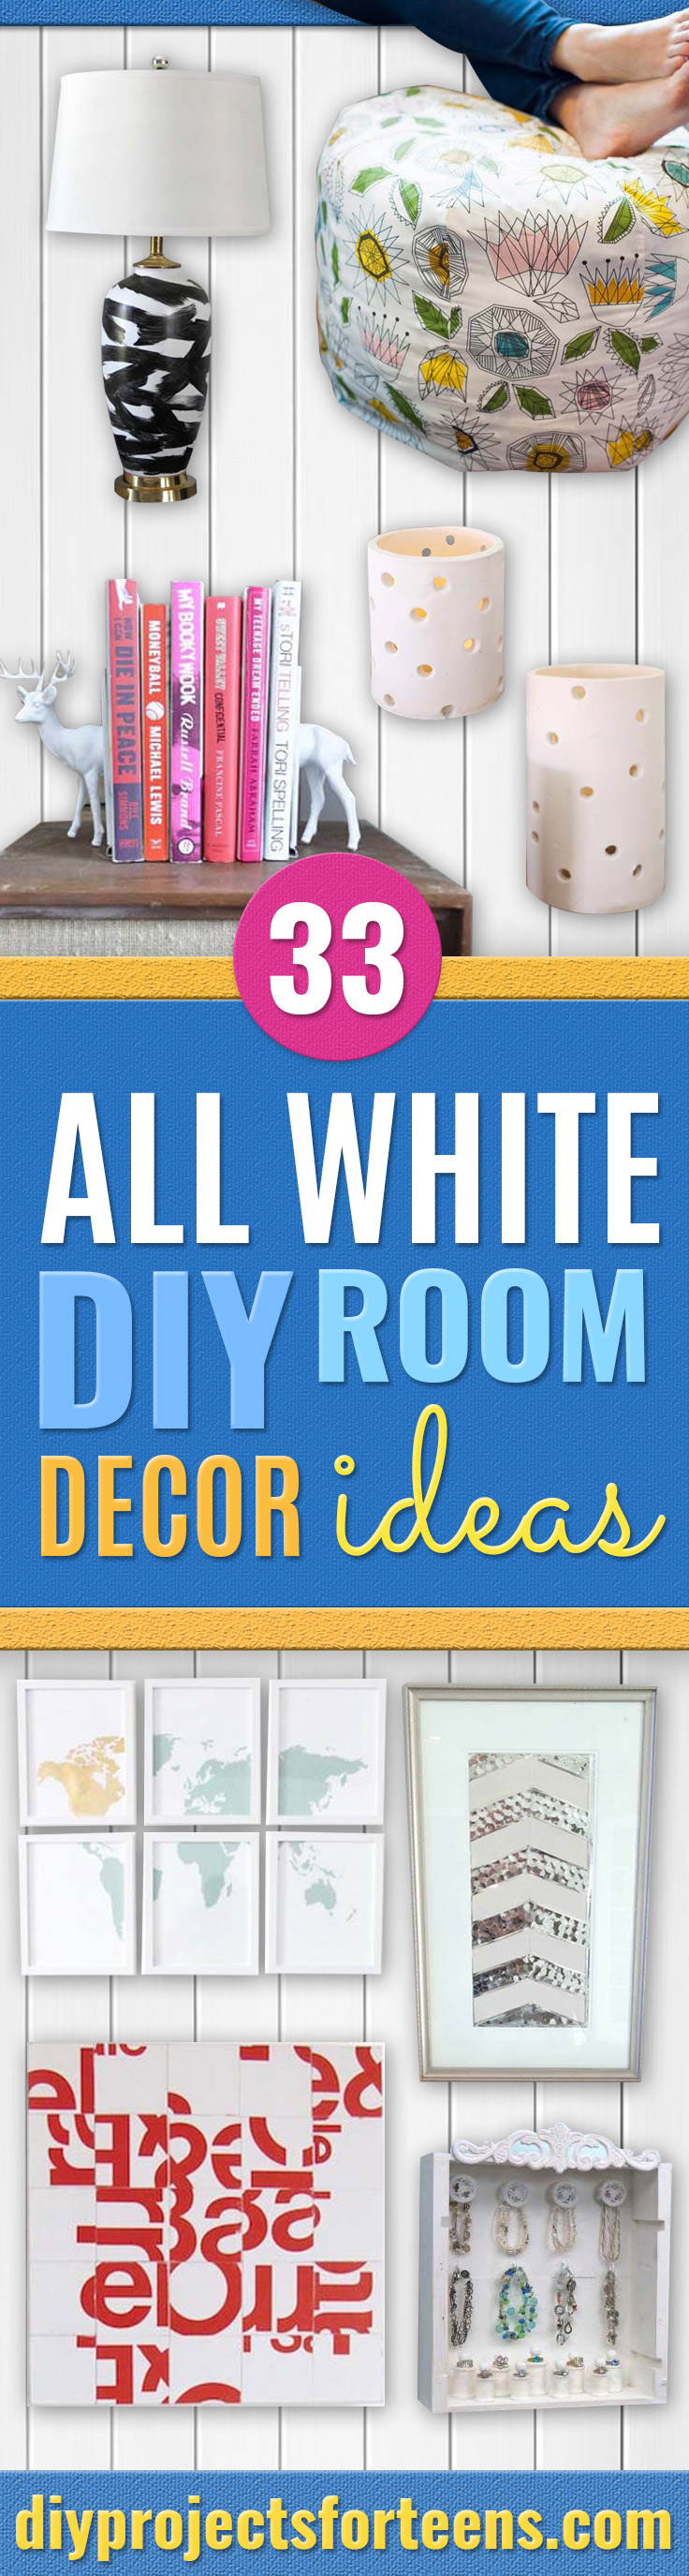 All White DIY Room Decor - Creative Home Decor Ideas for the Bedroom and Teen Rooms - Do It Yourself Crafts and White Wall Art, Bedding, Curtains, Lamps, Lighting, Rugs and Accessories - Easy Room Decoration Ideas for Girls, Teens and Tweens - Cute DIY Gifts and Projects With Step by Step Tutorials and Instructions 